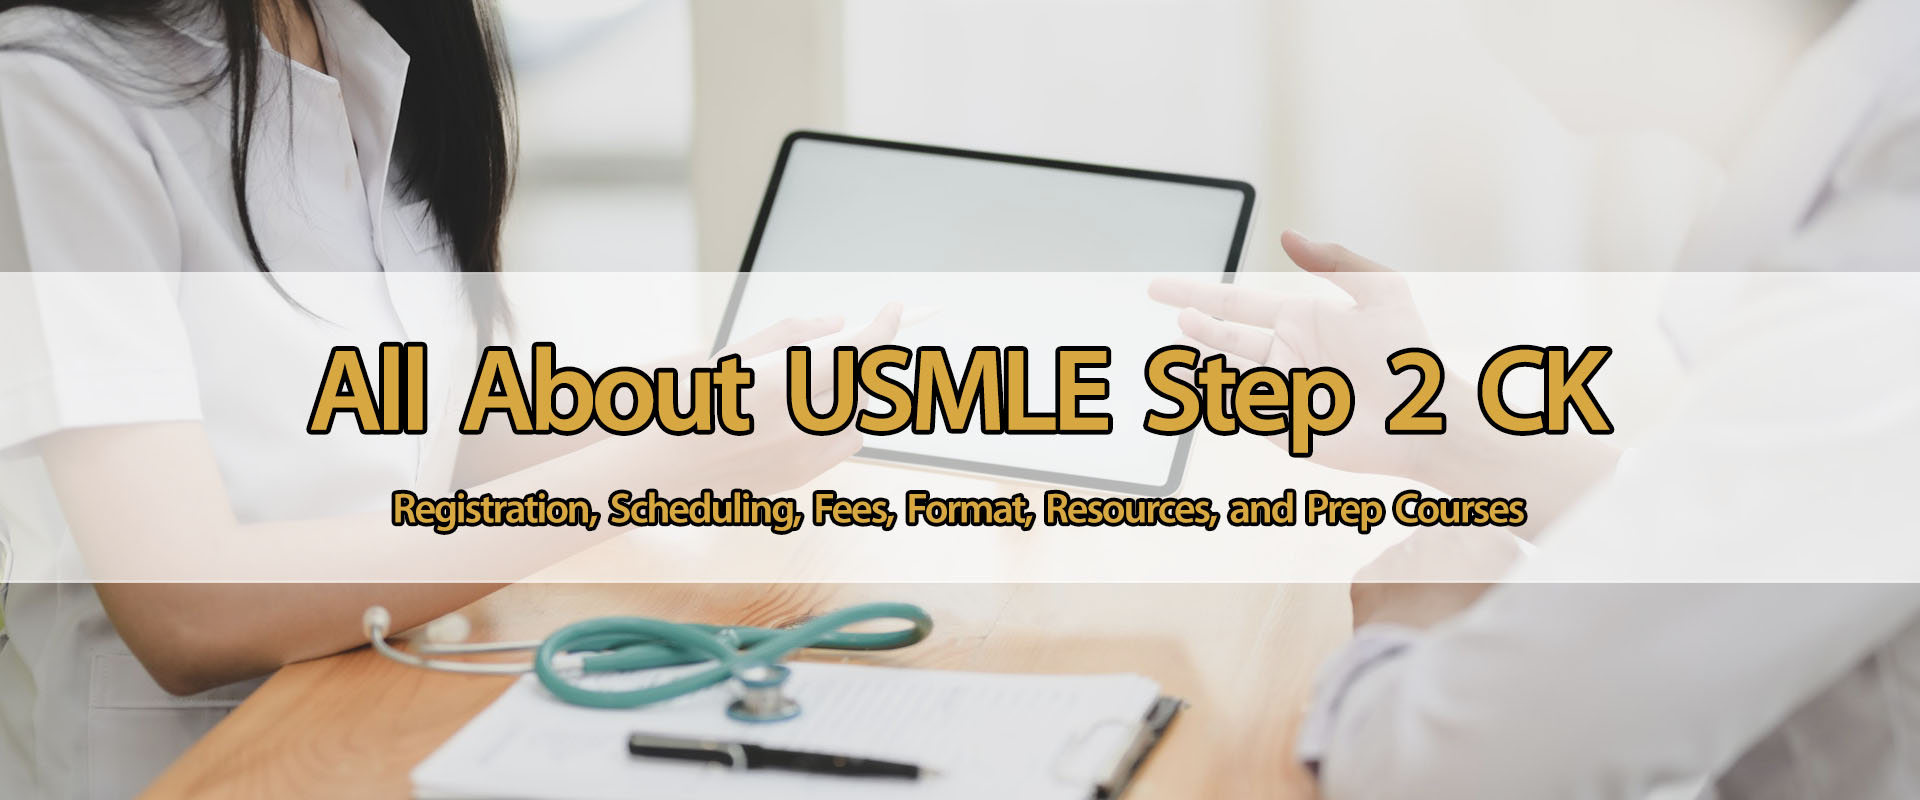 All About USMLE Step 2 CK